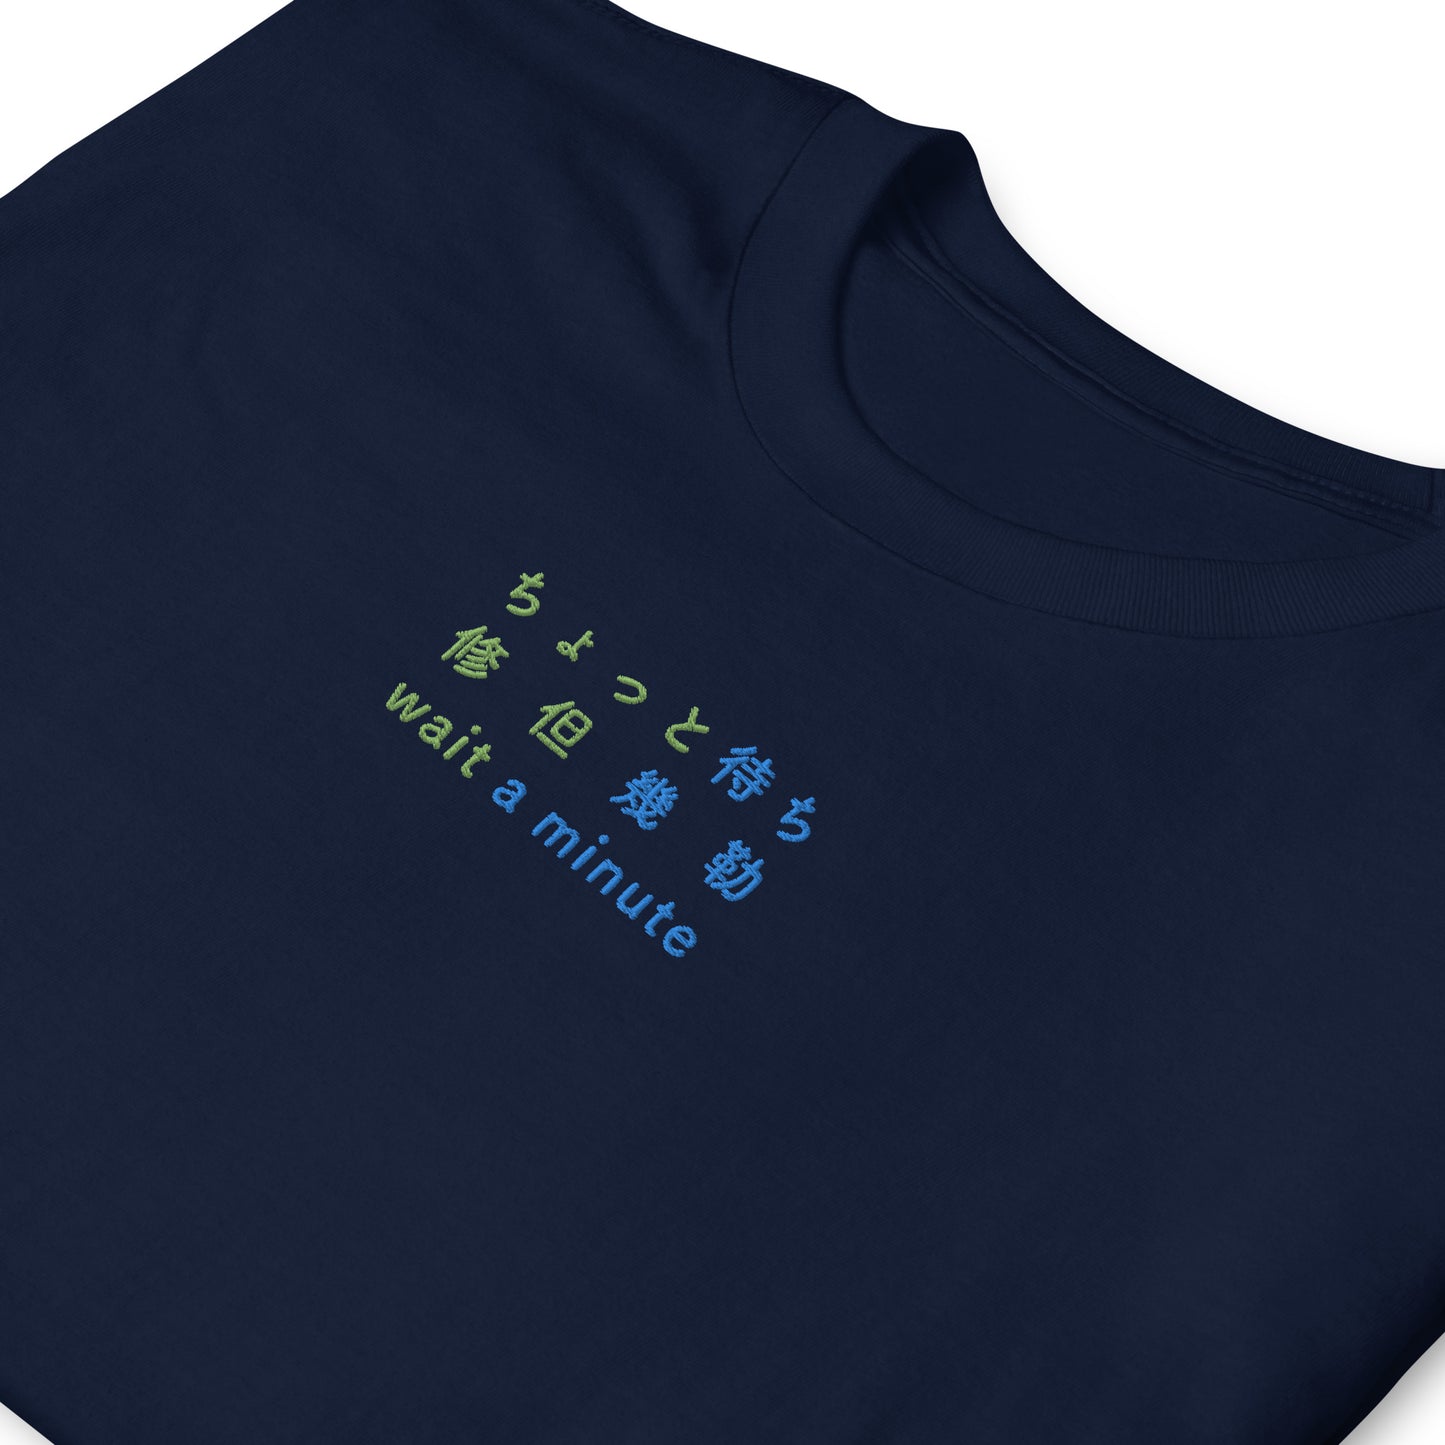 Navy High Quality Tee - Front Design with an Green, Blue Embroidery "Wait A Minute" in Japanese,Chinese and English Edit alt text